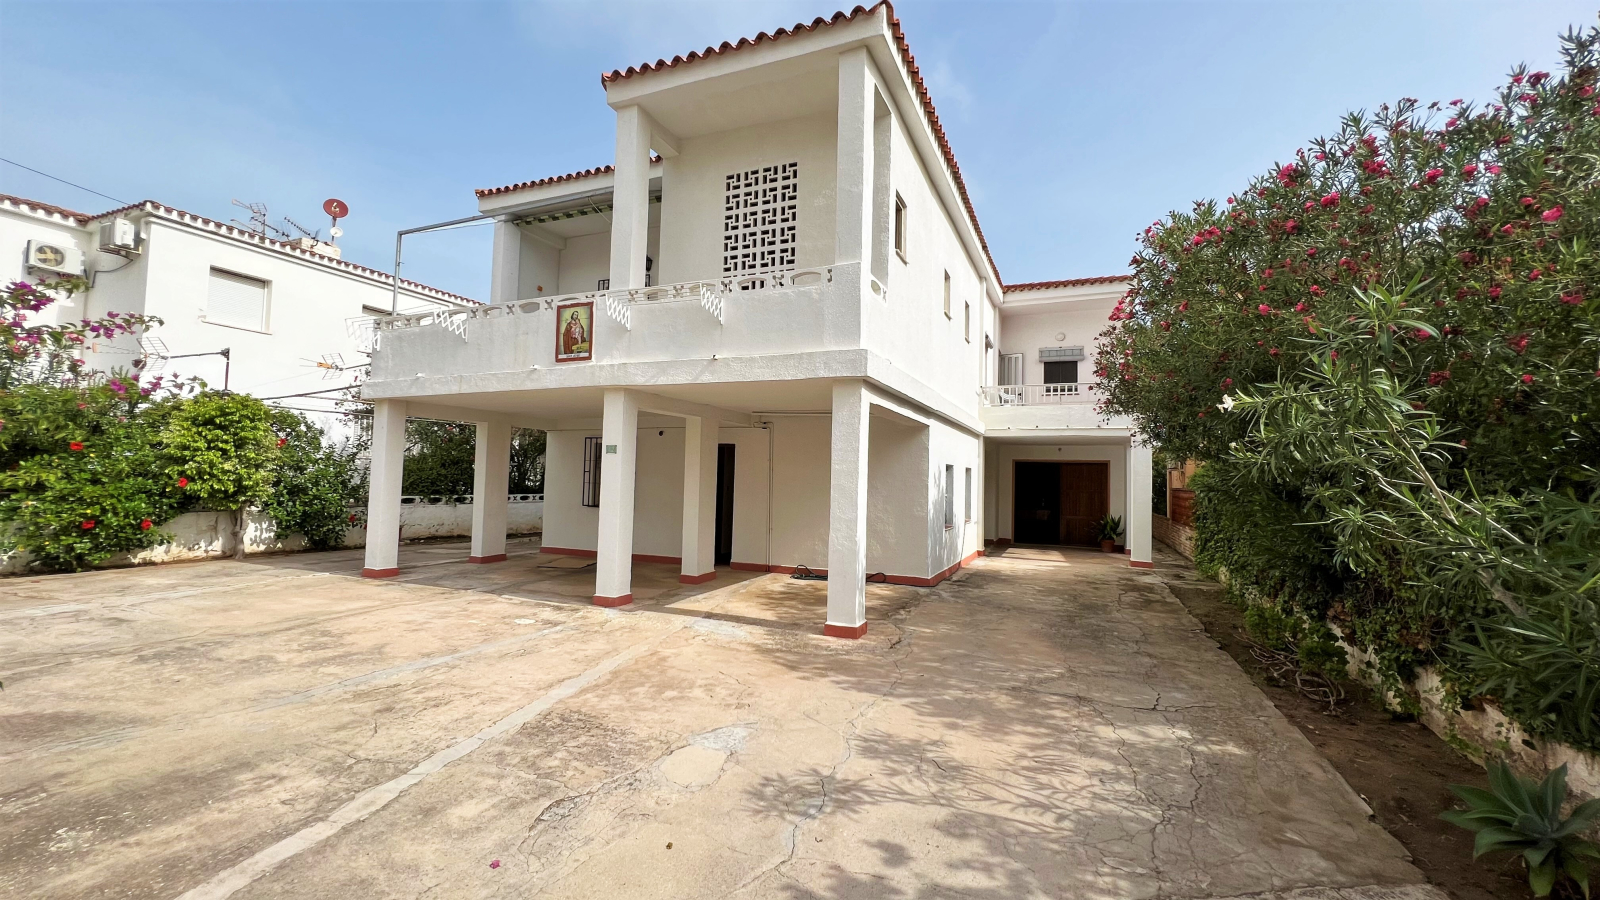 Villa in 1st sea line with beach access and 3 separate living units.